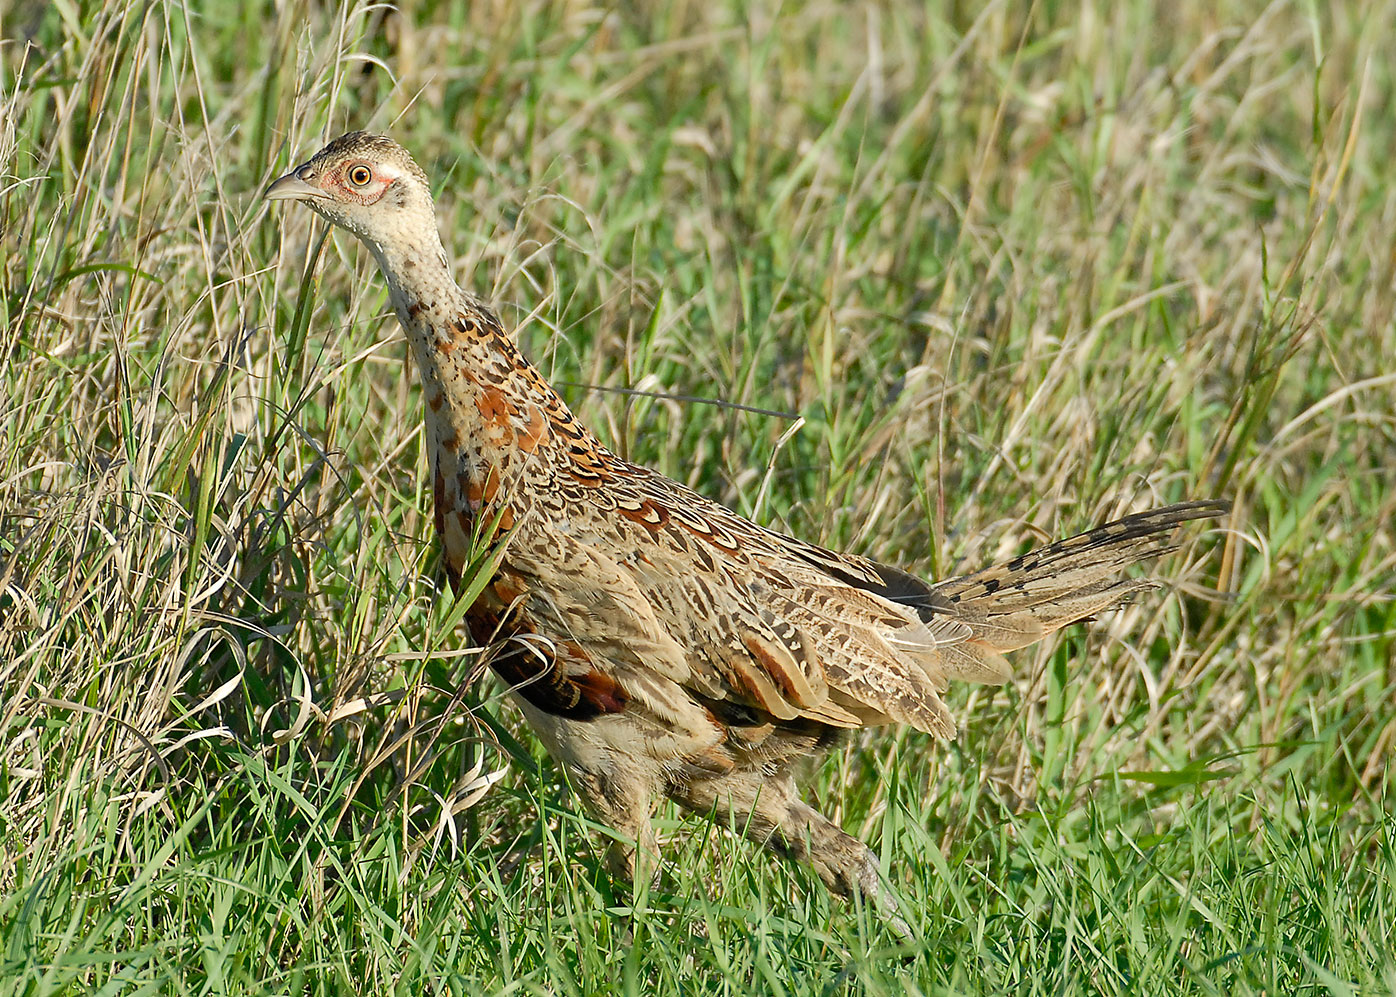 Young pheasant